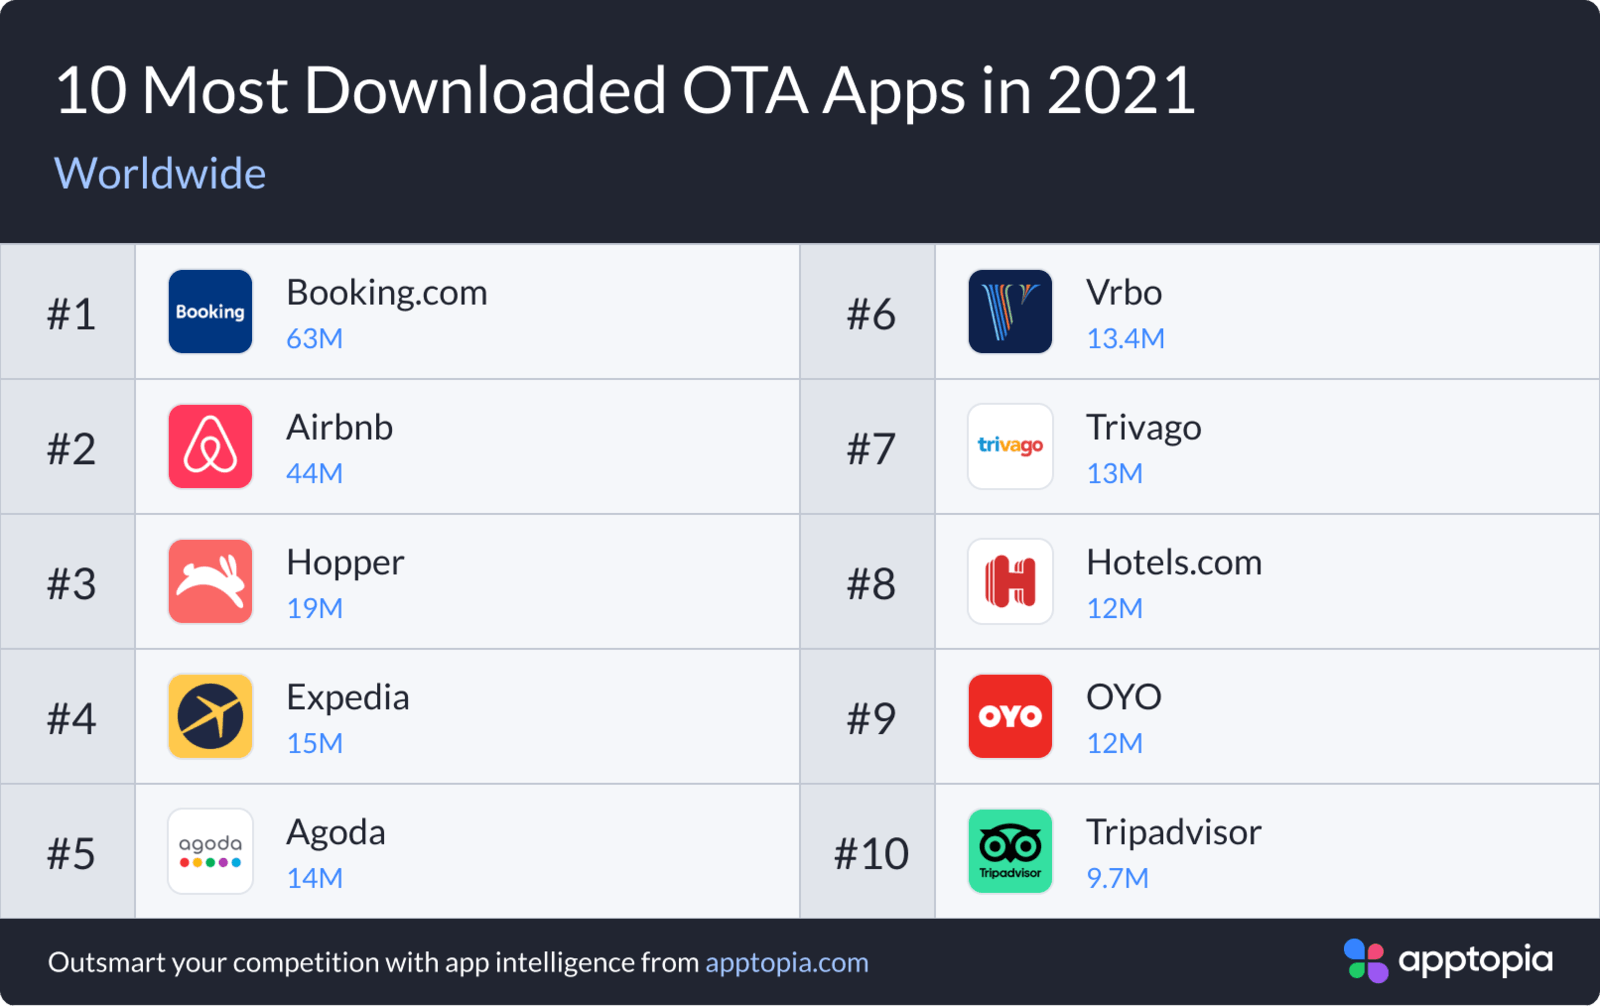 10 Most Downloaded OTA Apps in 2021